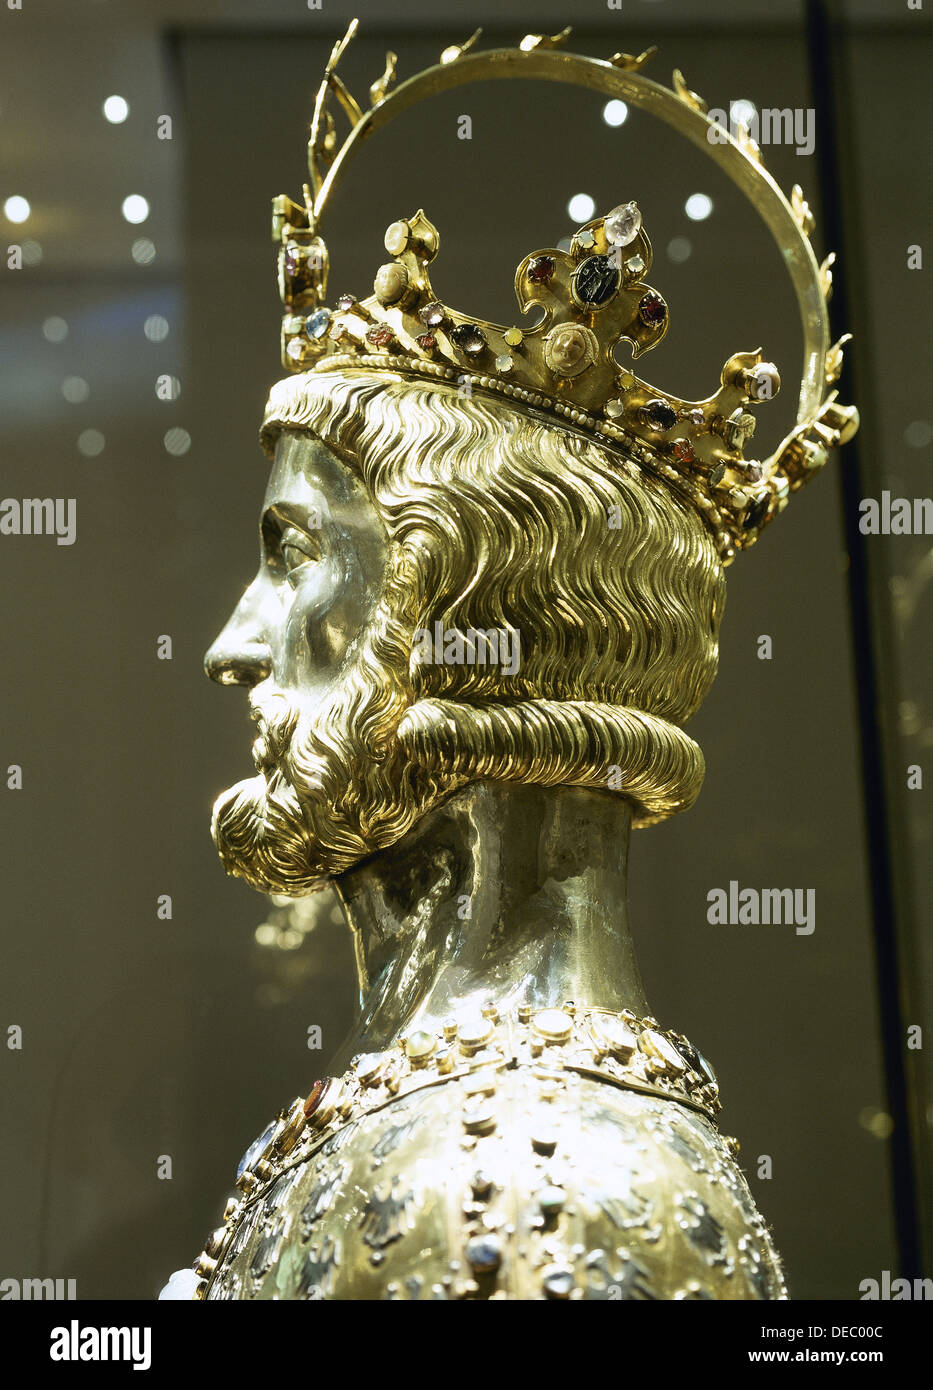 Charlemagne (742-814). Reliquary bust. Made from silver and gold decorated with antique gems and cameos. Stock Photo